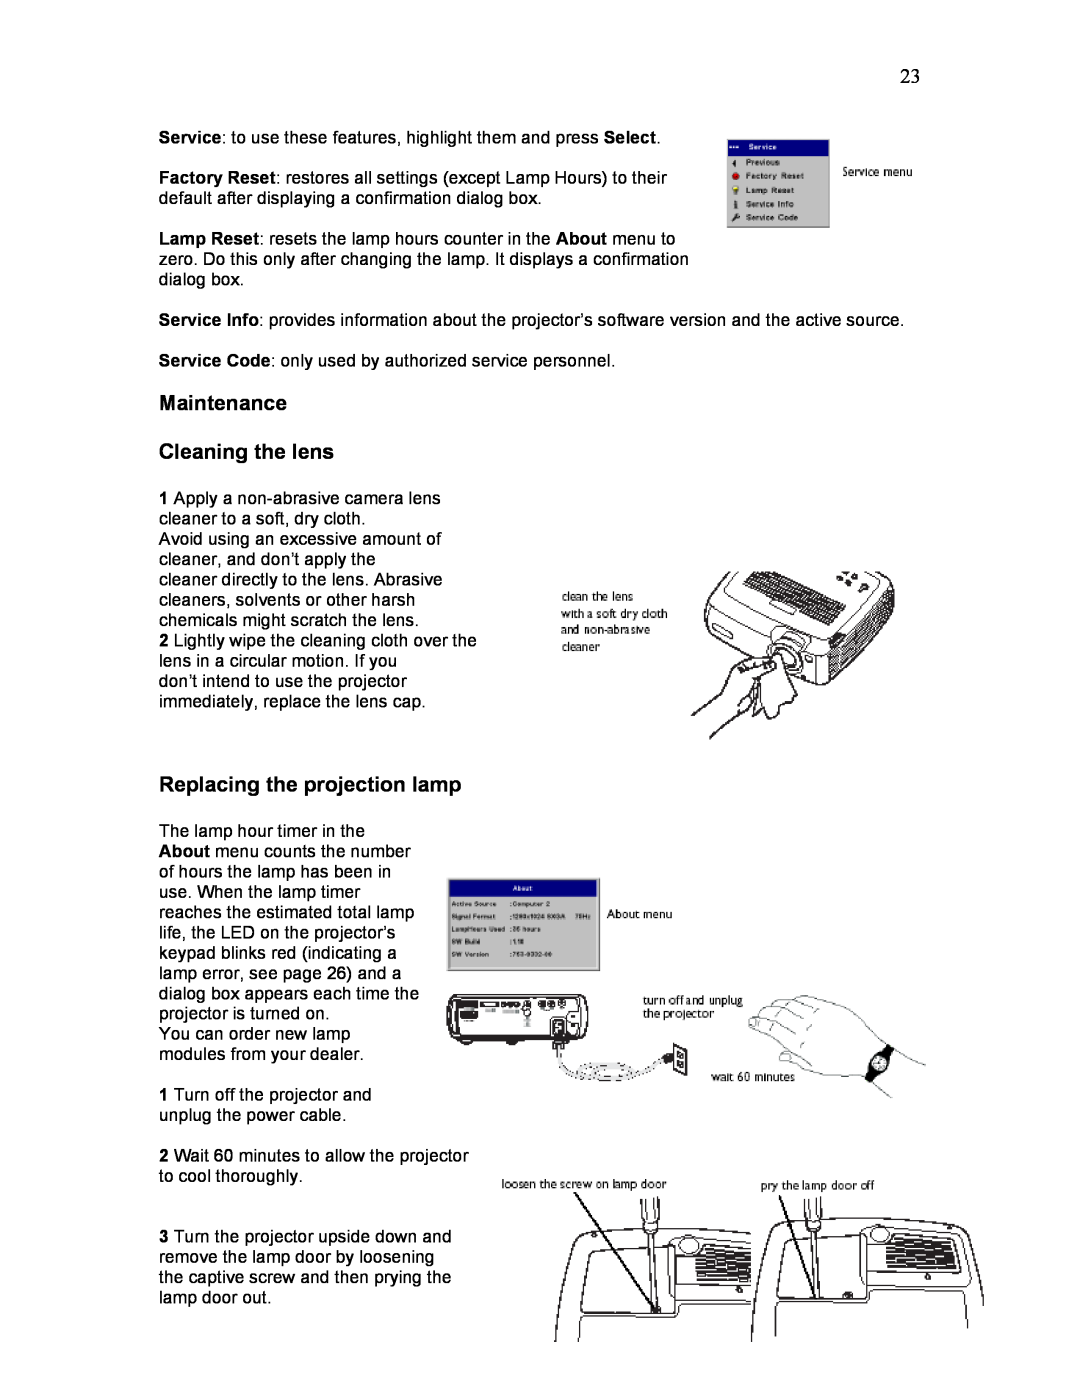 Knoll Systems HD225 user manual Maintenance Cleaning the lens, Replacing the projection lamp 